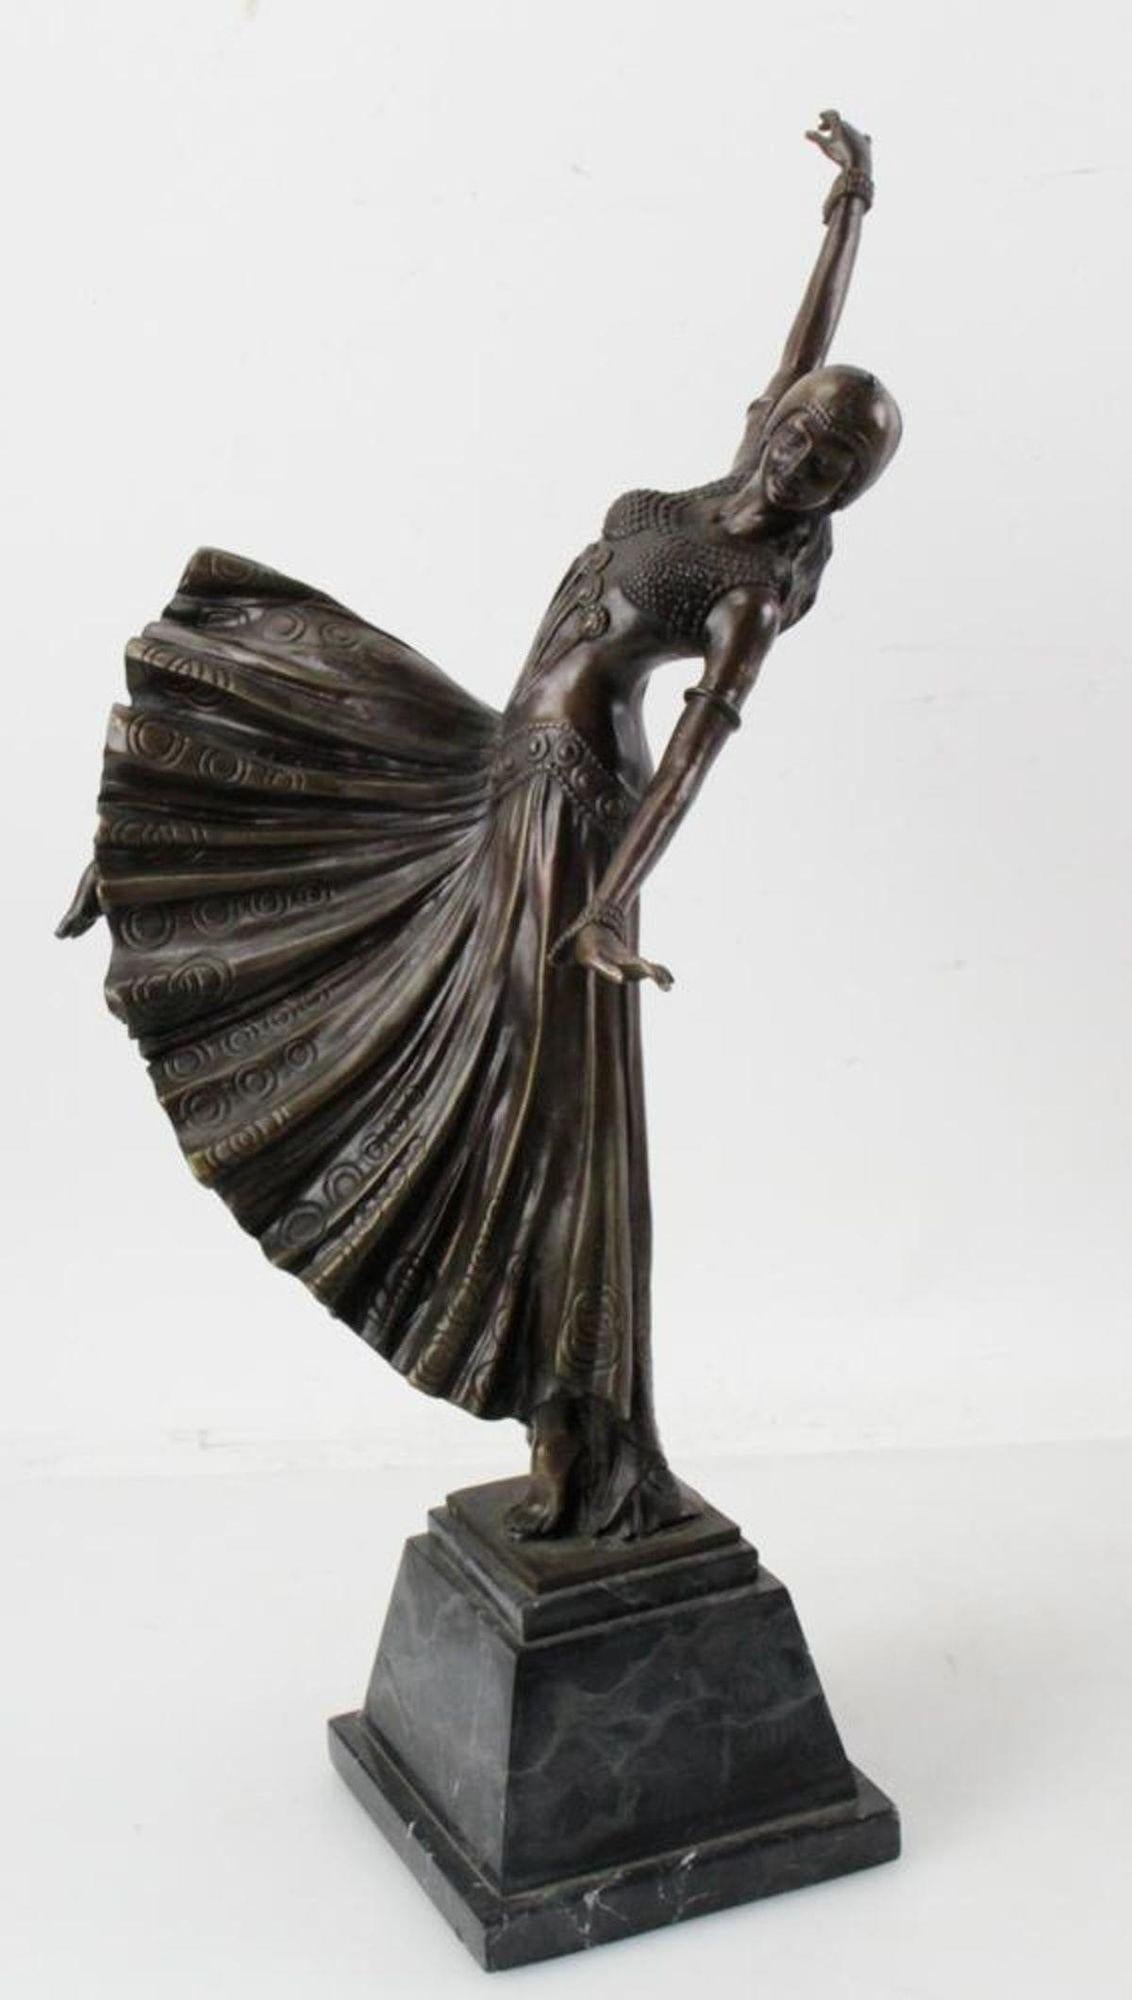 This beautiful Art Deco figural sculpture of a female dancer made in France during the vibrant Art Deco era of the 1920s, captures an Oriental dancer in a moment of fluid, mesmerizing motion. Inspired by the legendary Romanian artist Demétre H.